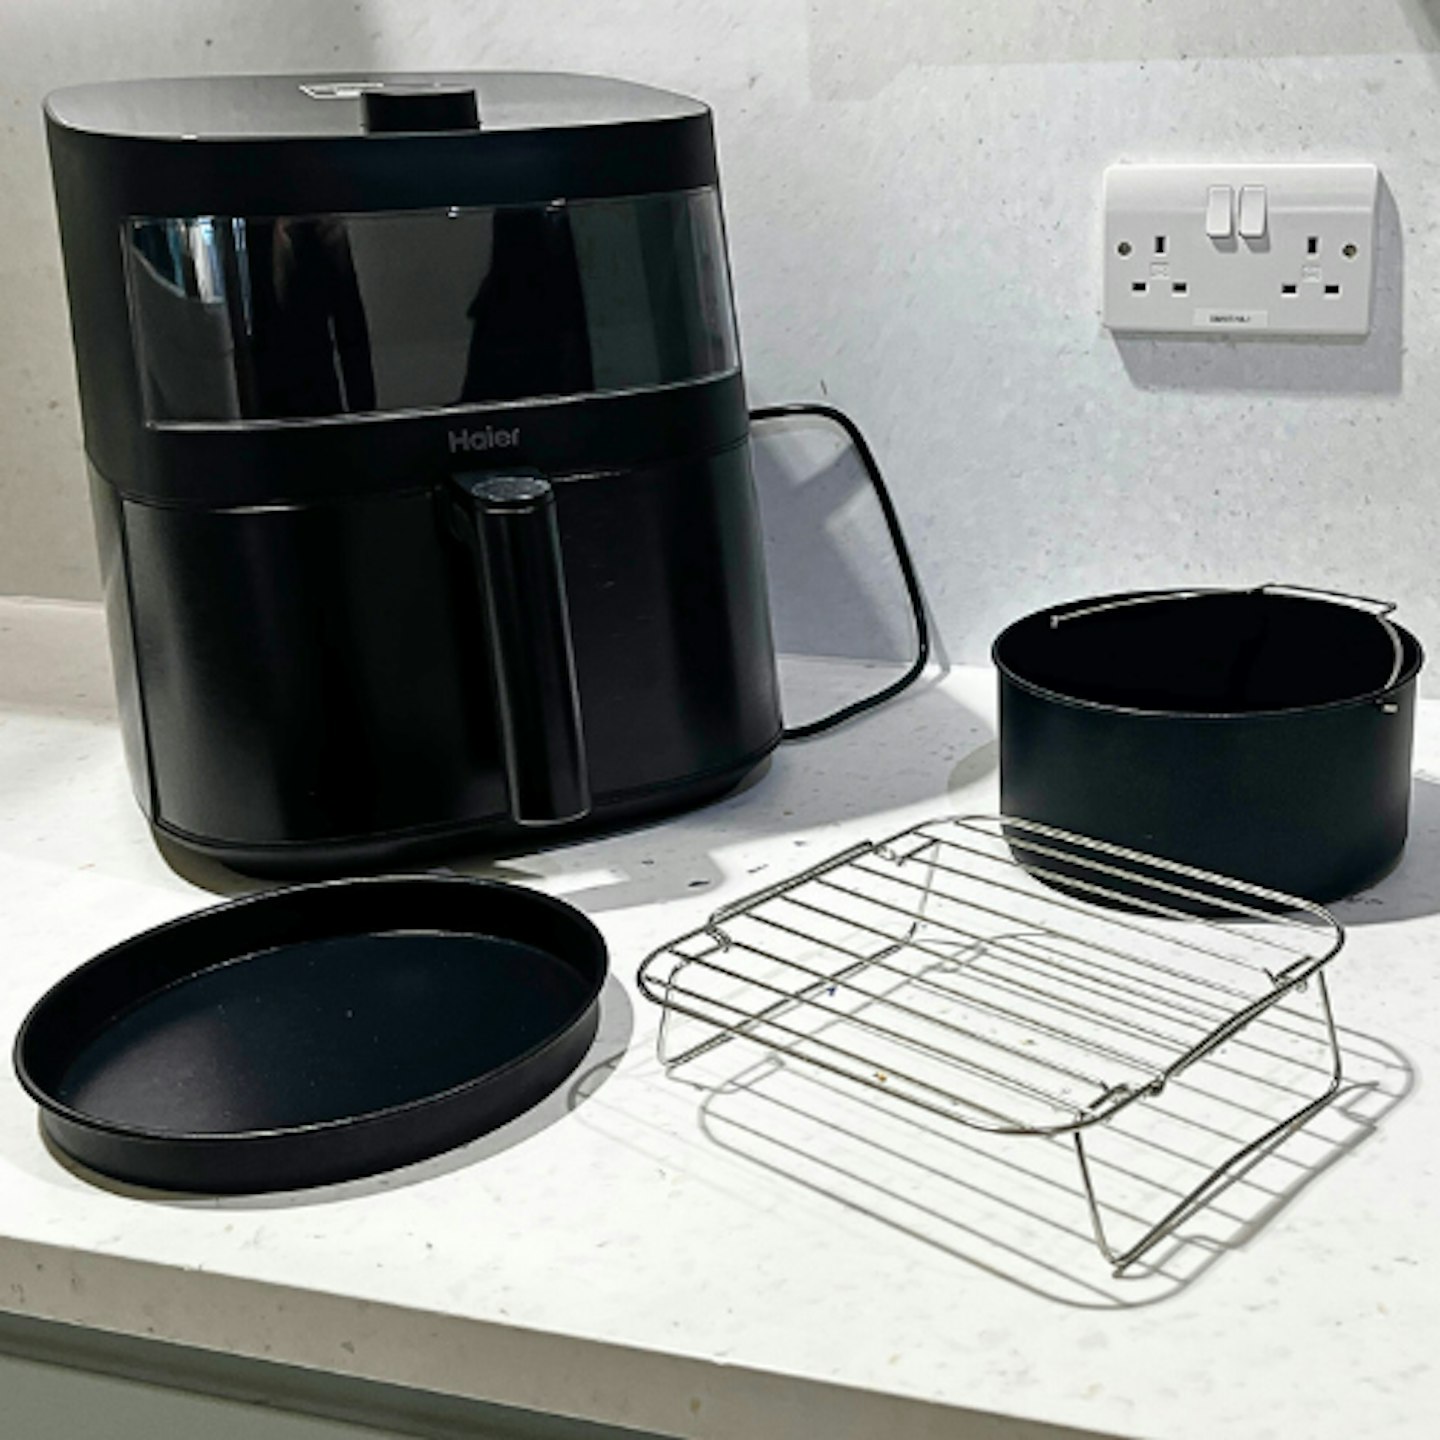 Haier Multi Air Fryer accessories on a countertop